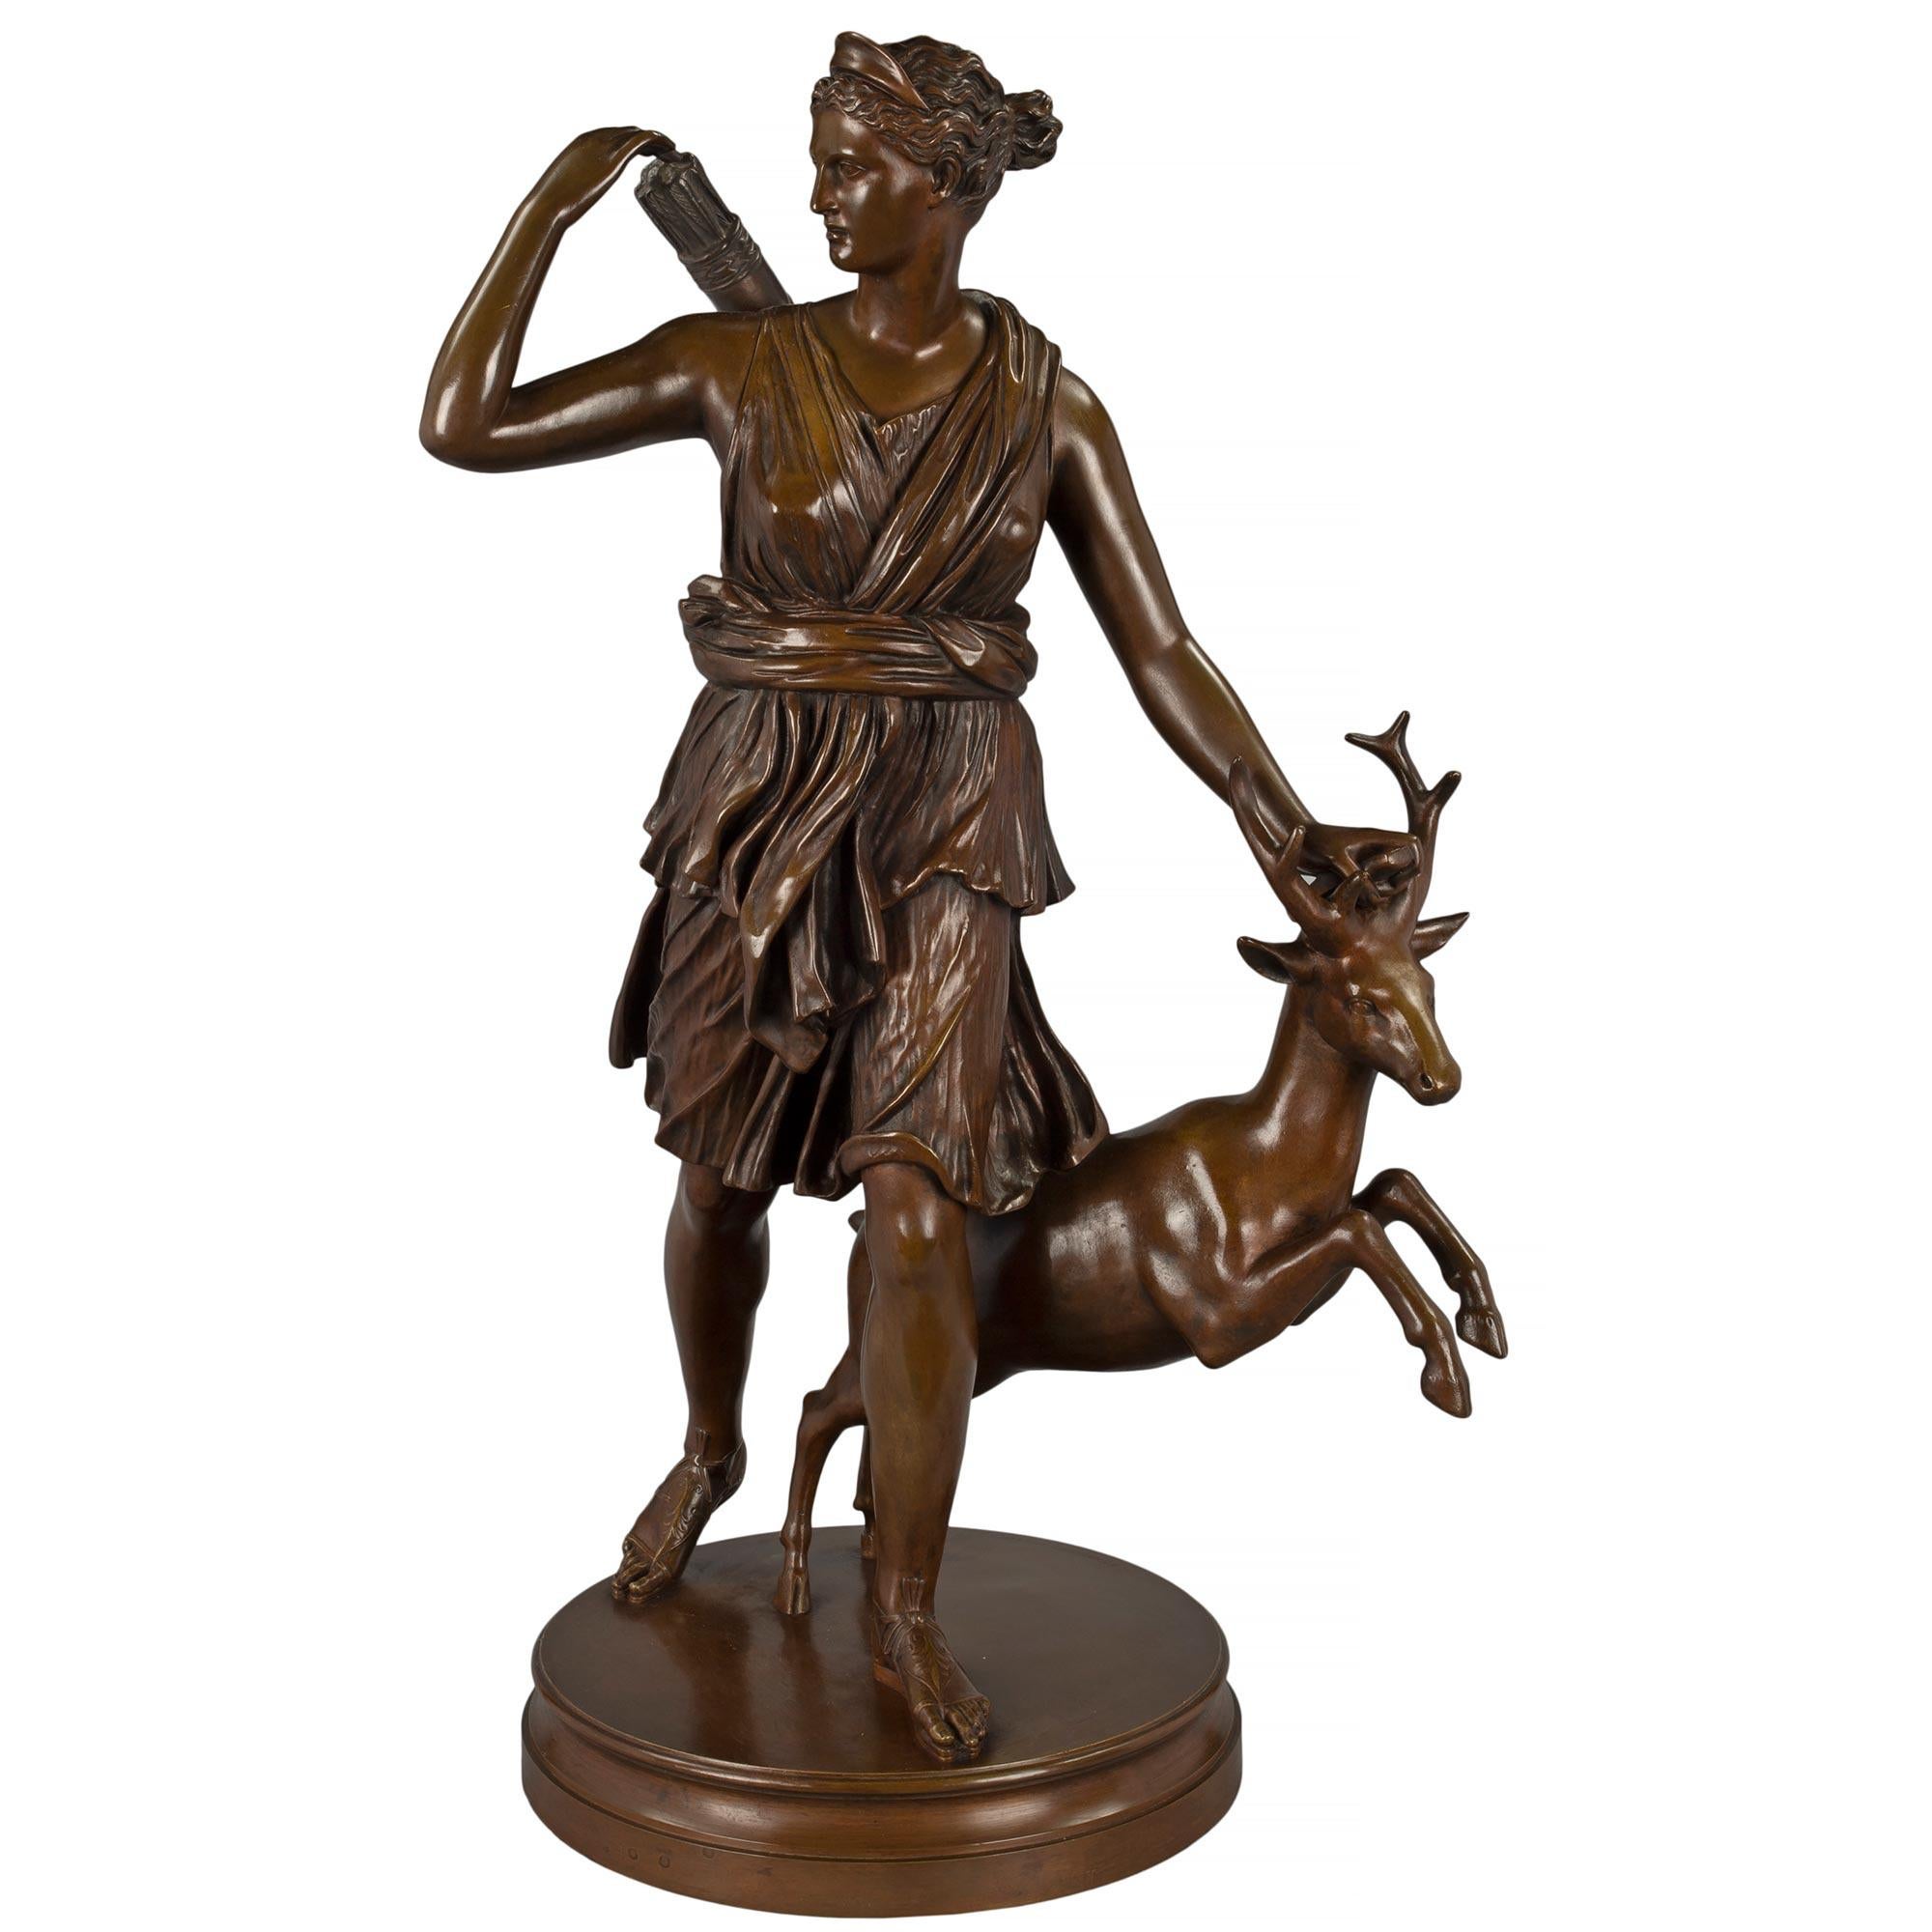 French Mid-19th Century Louis XVI Style Patinated Bronze Statue